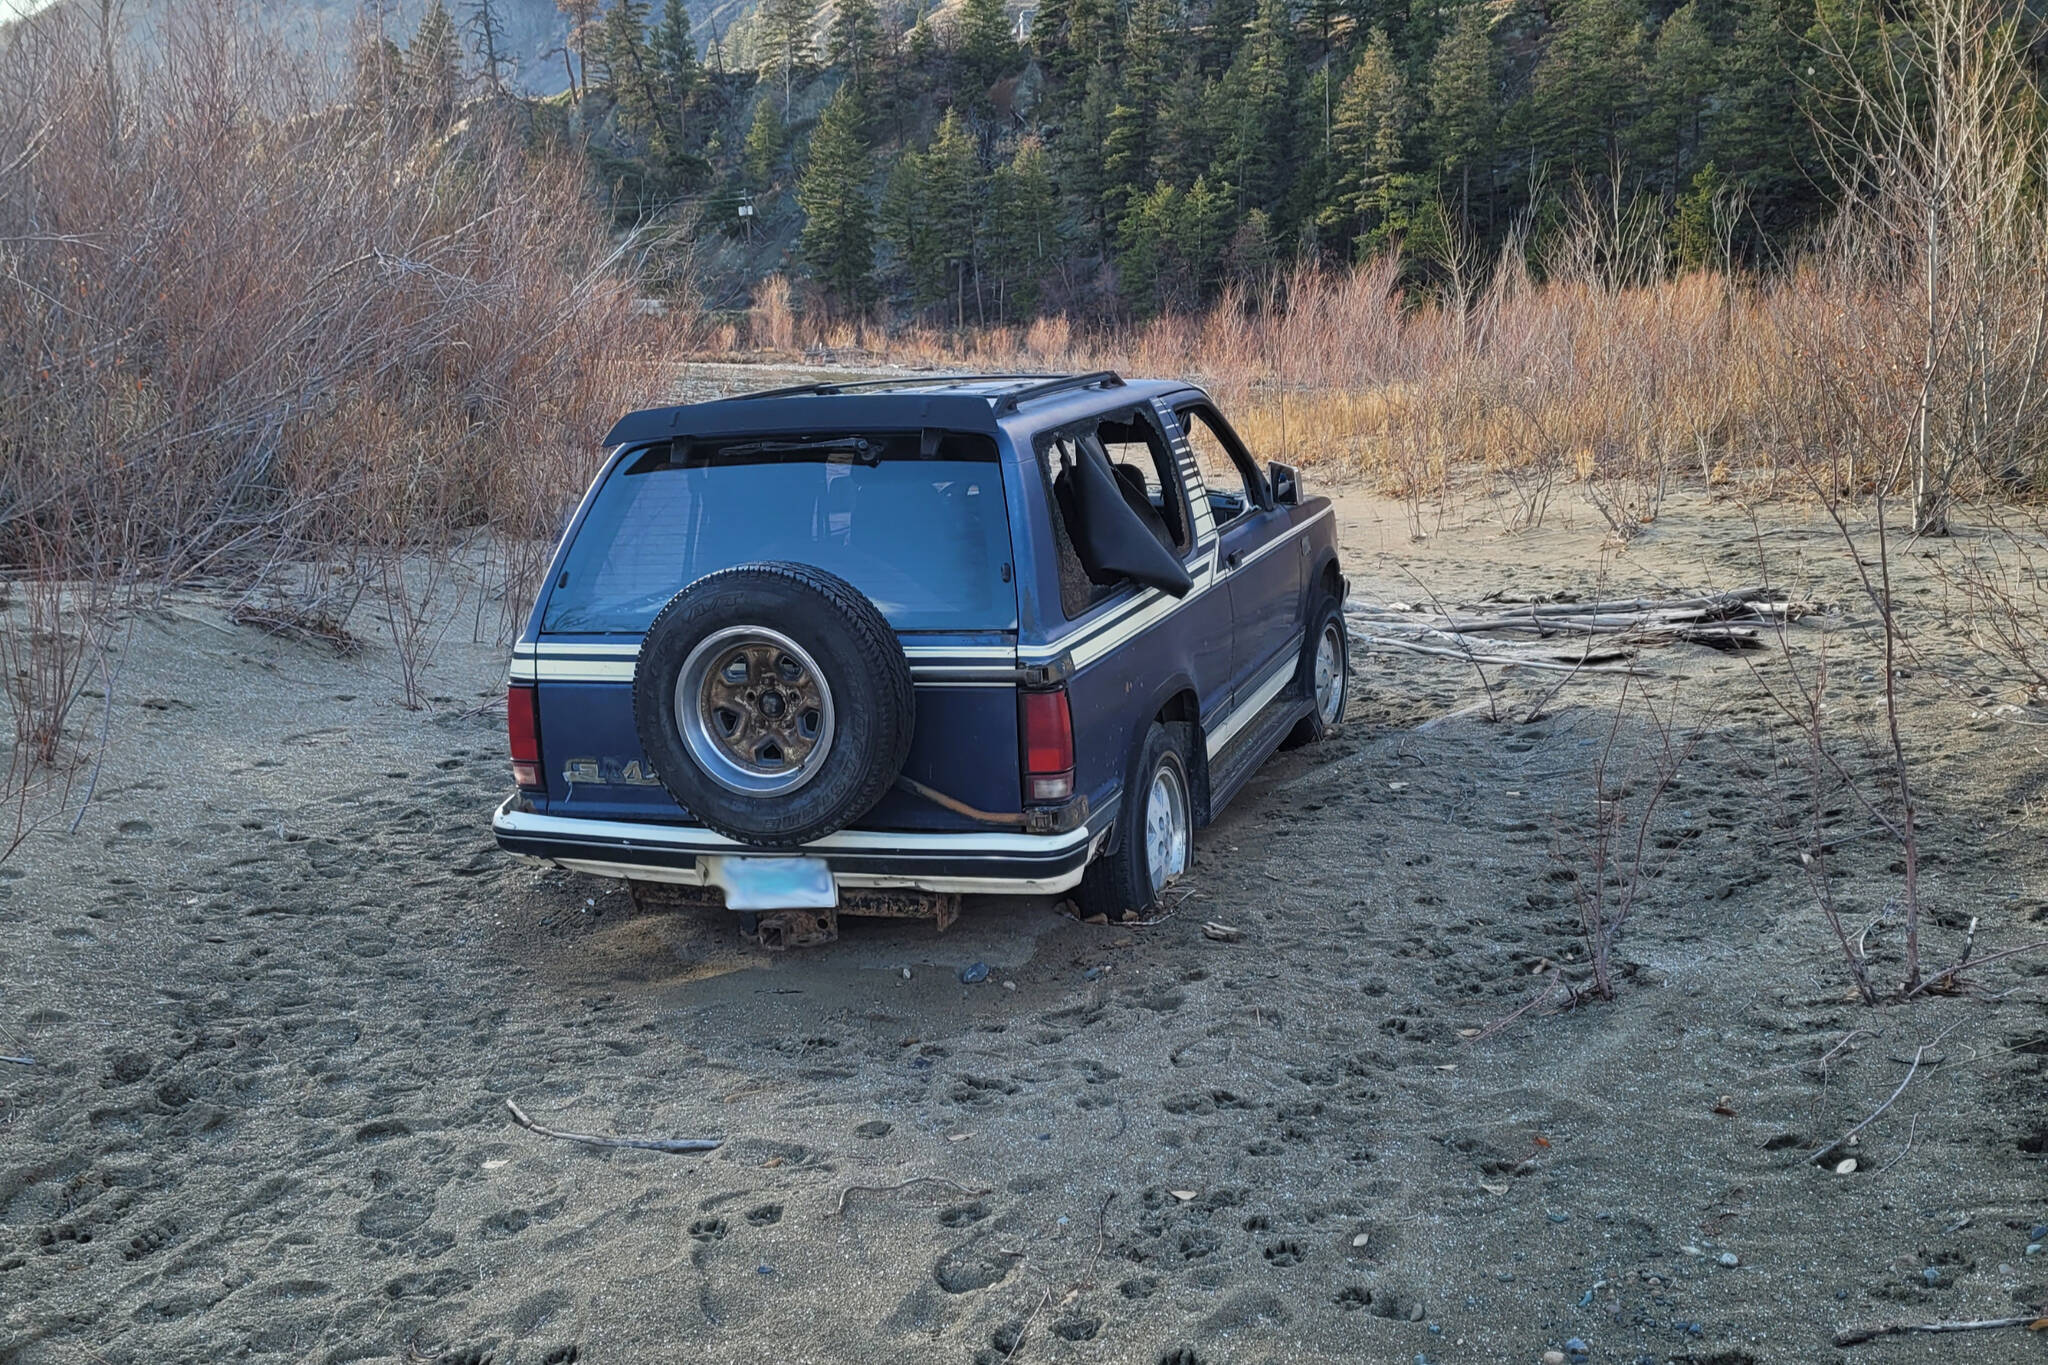 The pictured vehicle has been sitting near abandoned near the Similkameen River for months, frustrating residents nearby. (Bob McAtamney - Contributed)